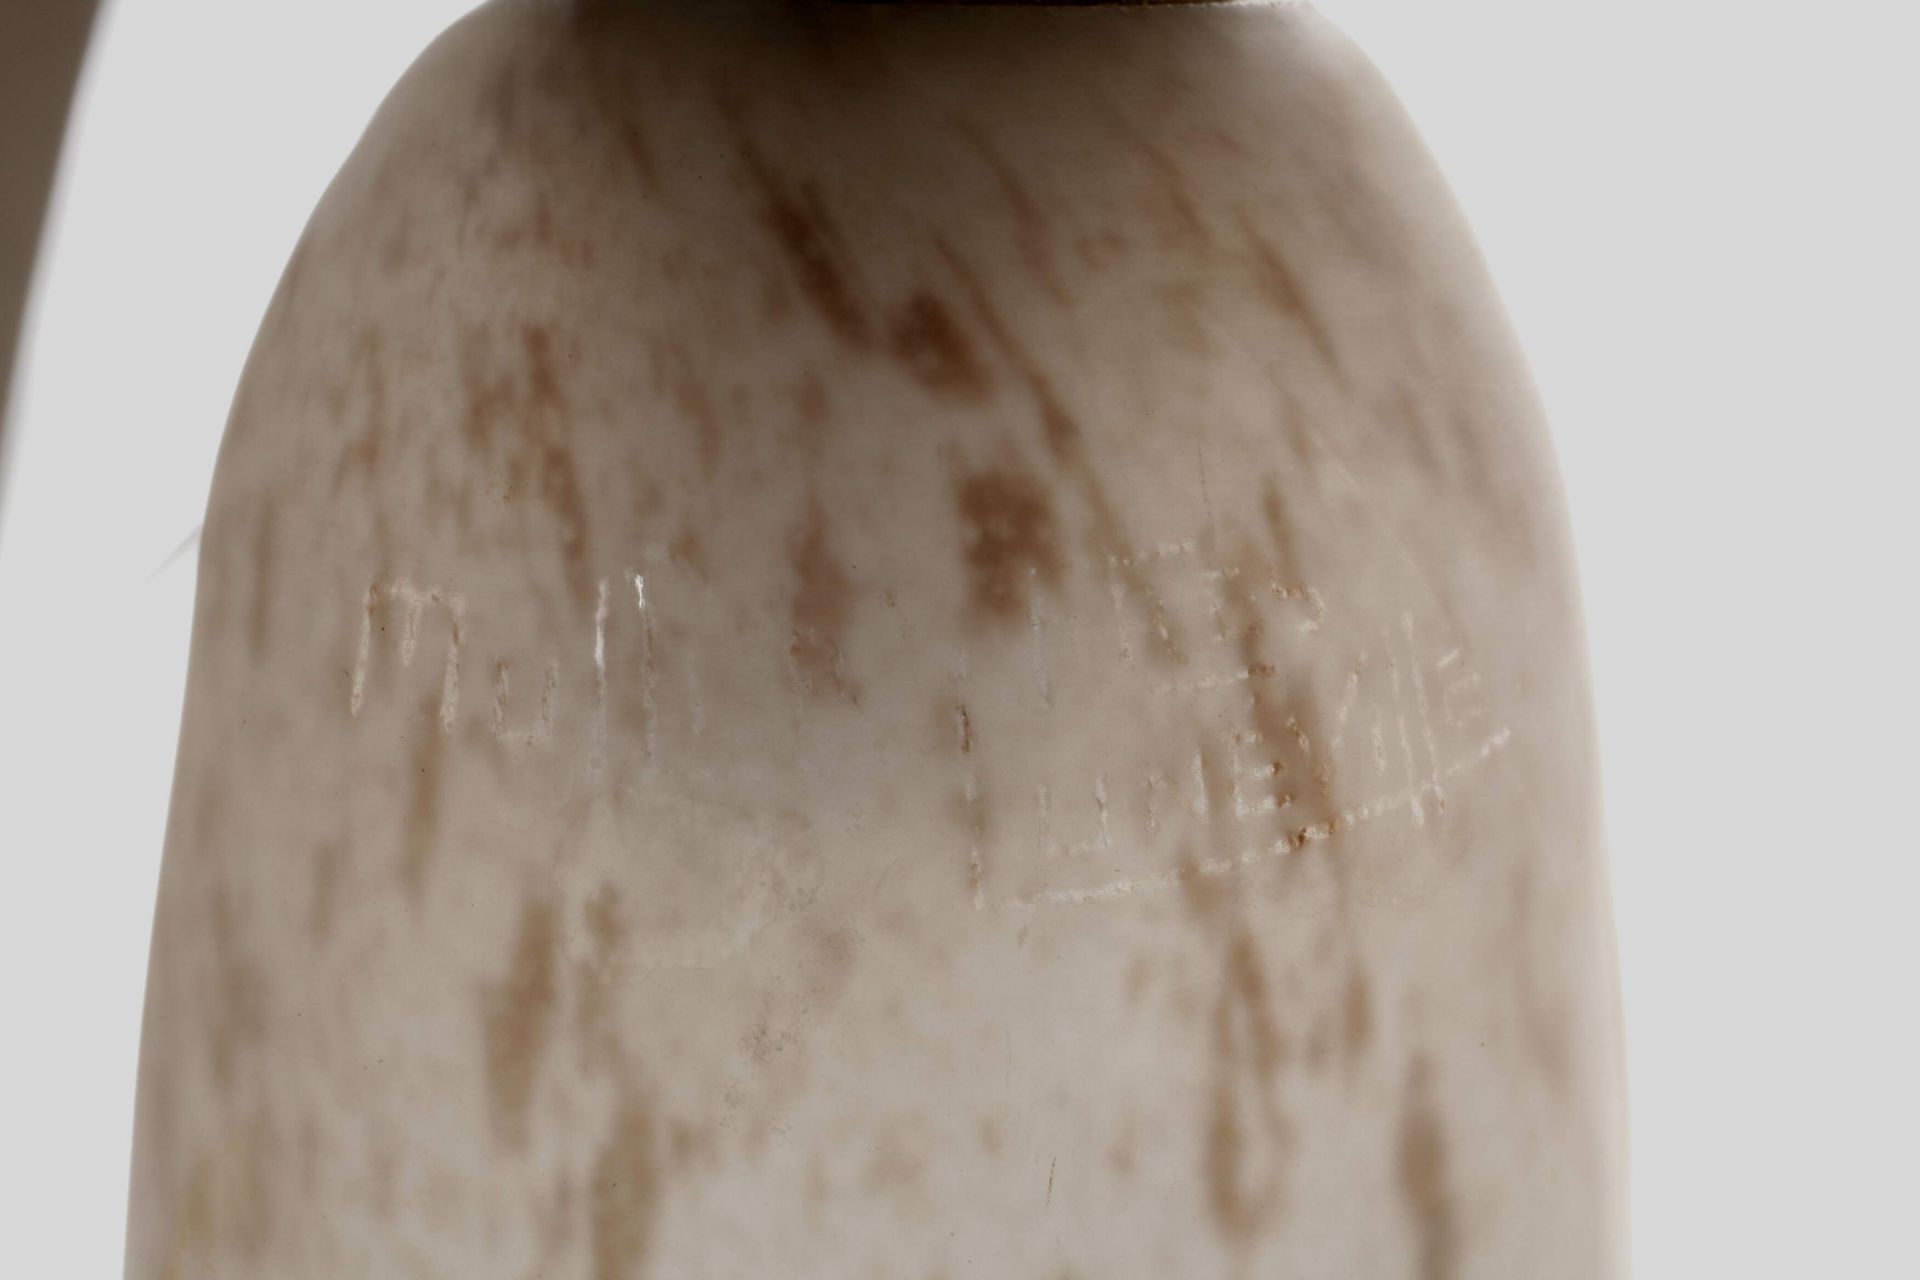 Table lamp Muller Freres - Image 6 of 7